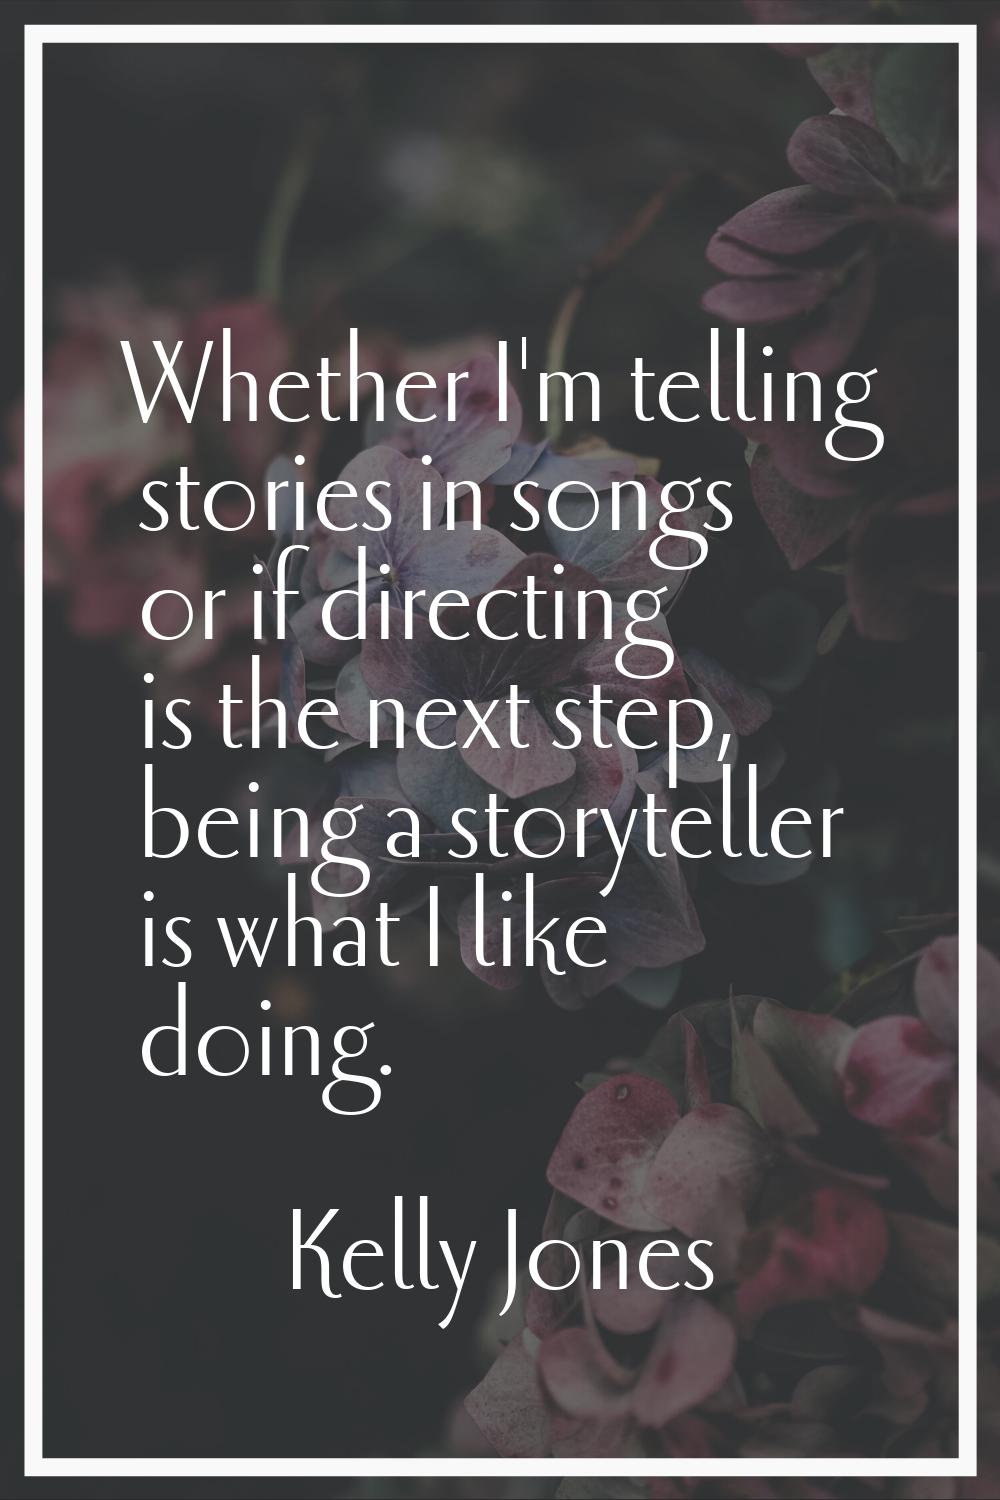 Whether I'm telling stories in songs or if directing is the next step, being a storyteller is what 